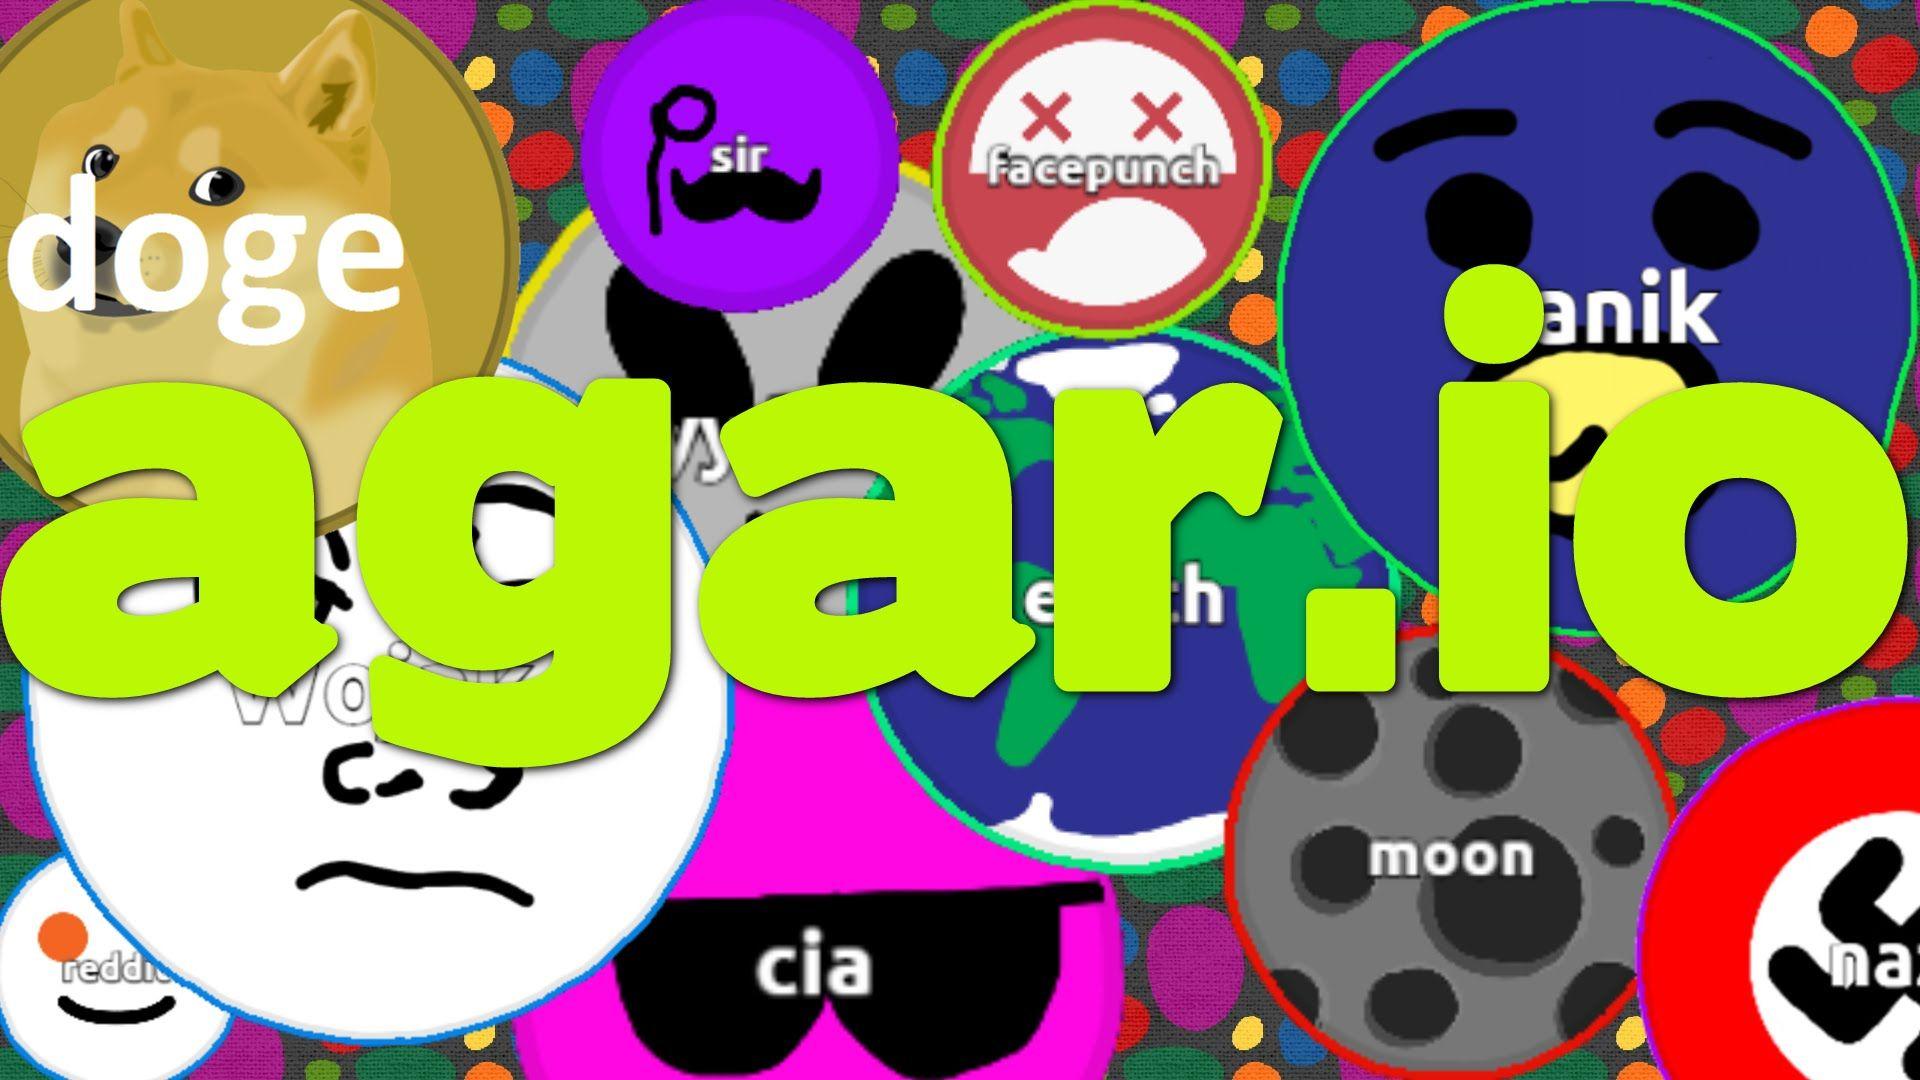 Agar.io Game- What Hackers Did to Make It More Exciting